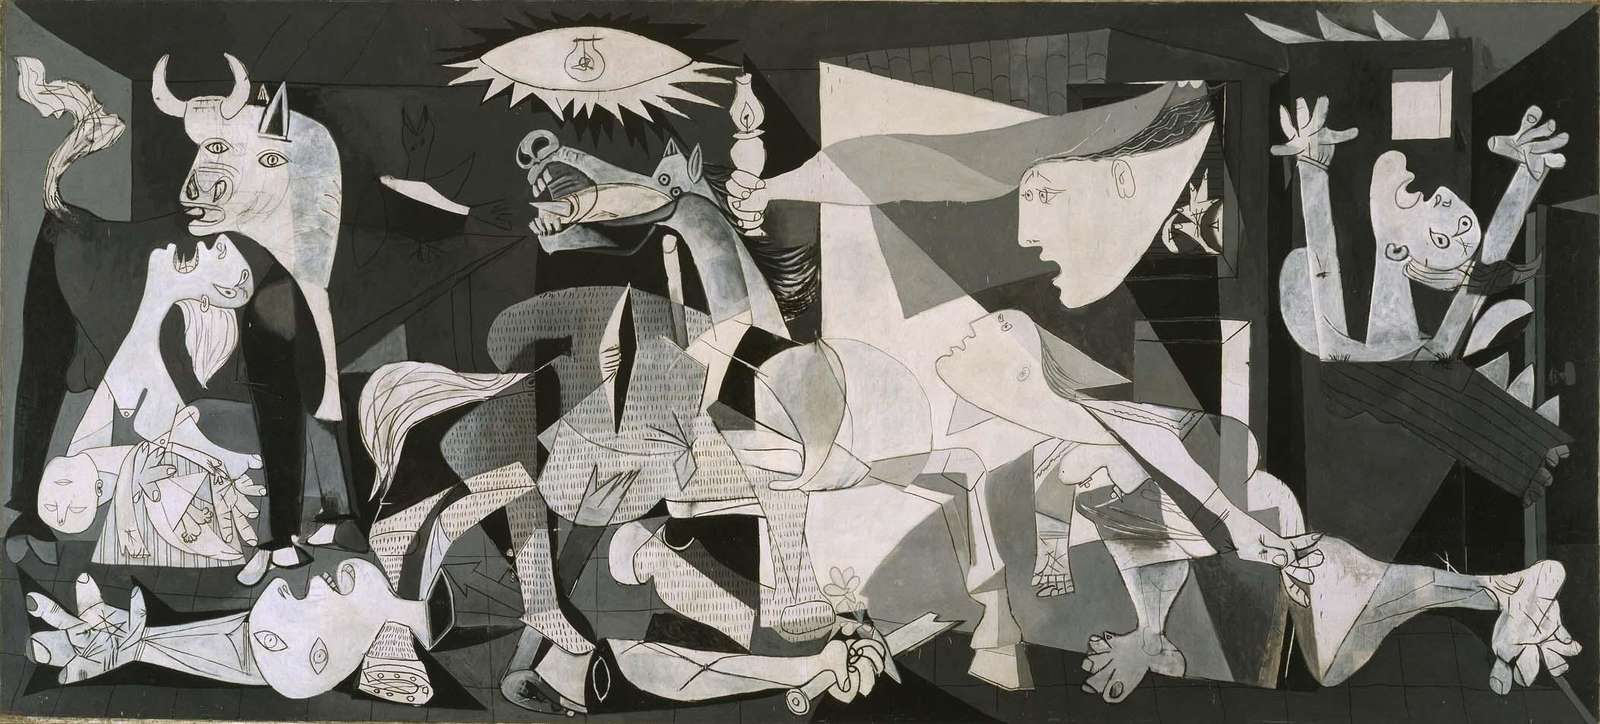 Picasso-Guernica puzzle online from photo